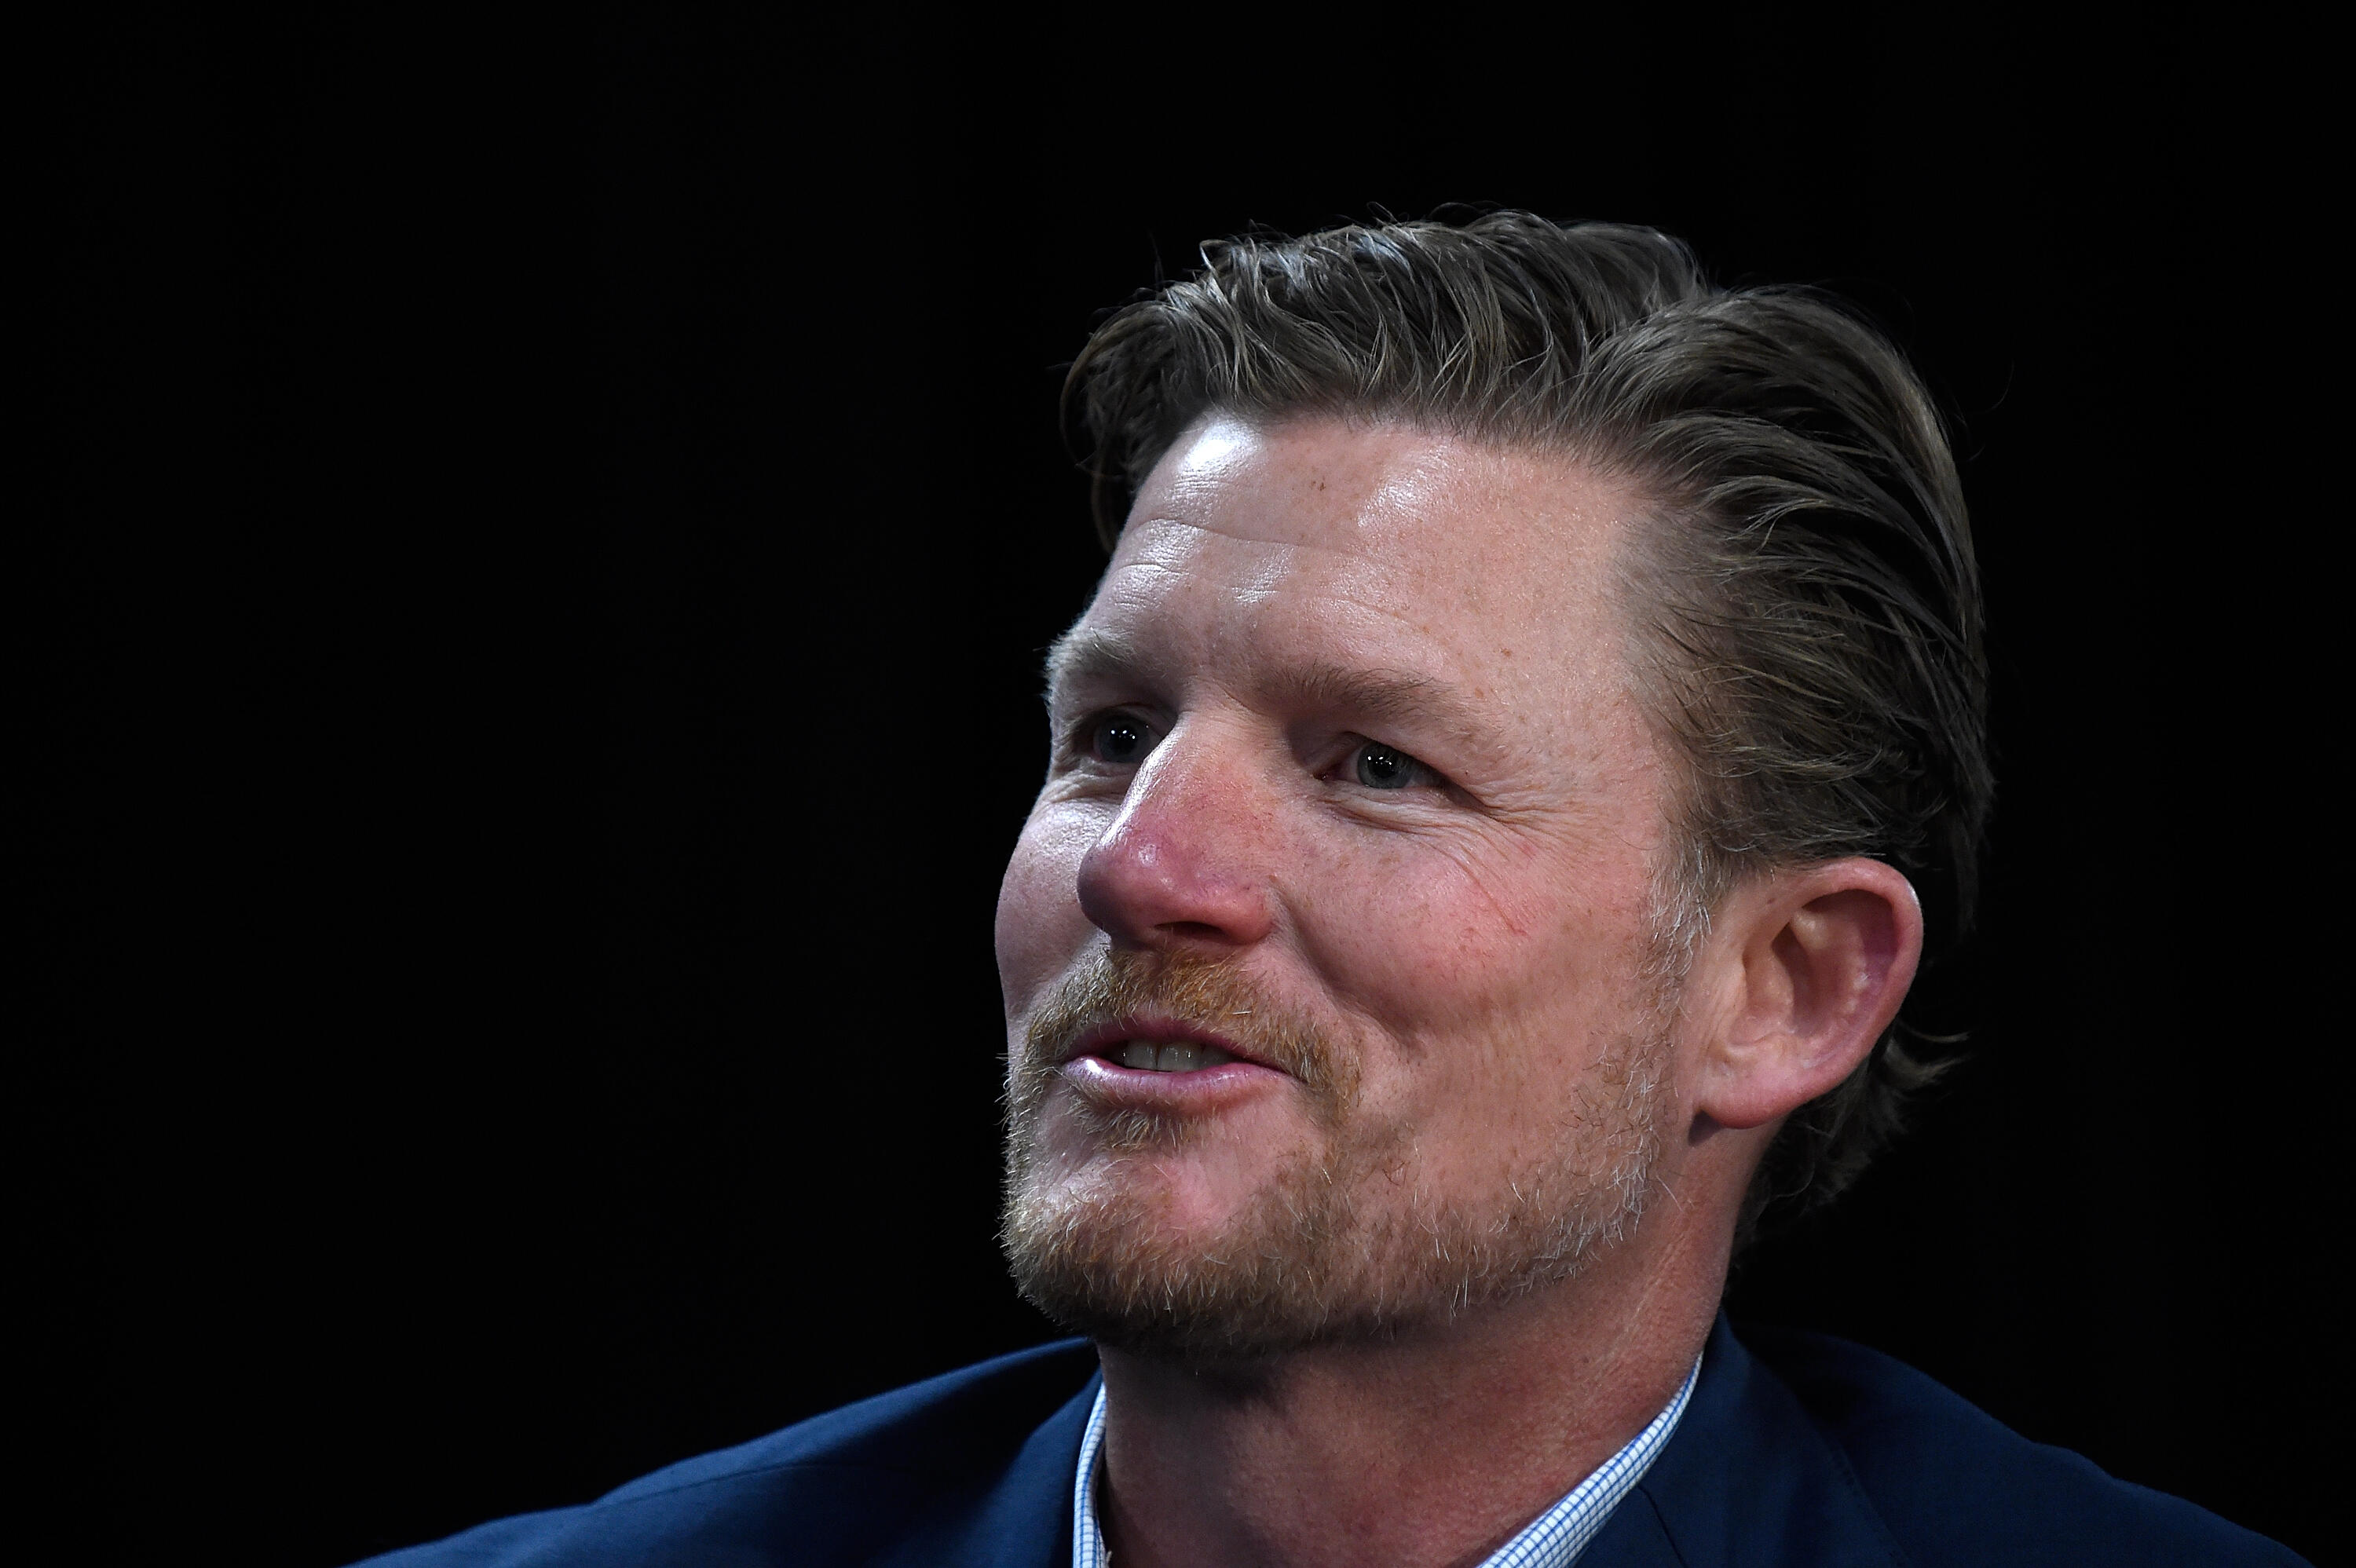 THOUSAND OAKS, CA - JANUARY 13:  General manager Les Snead of the Los Angeles Rams announces today in a press conference the hiring of new head coach Sean McVay on January 13, 2017 in Thousand Oaks, California. McVay is the youngest head coach in NFL hist